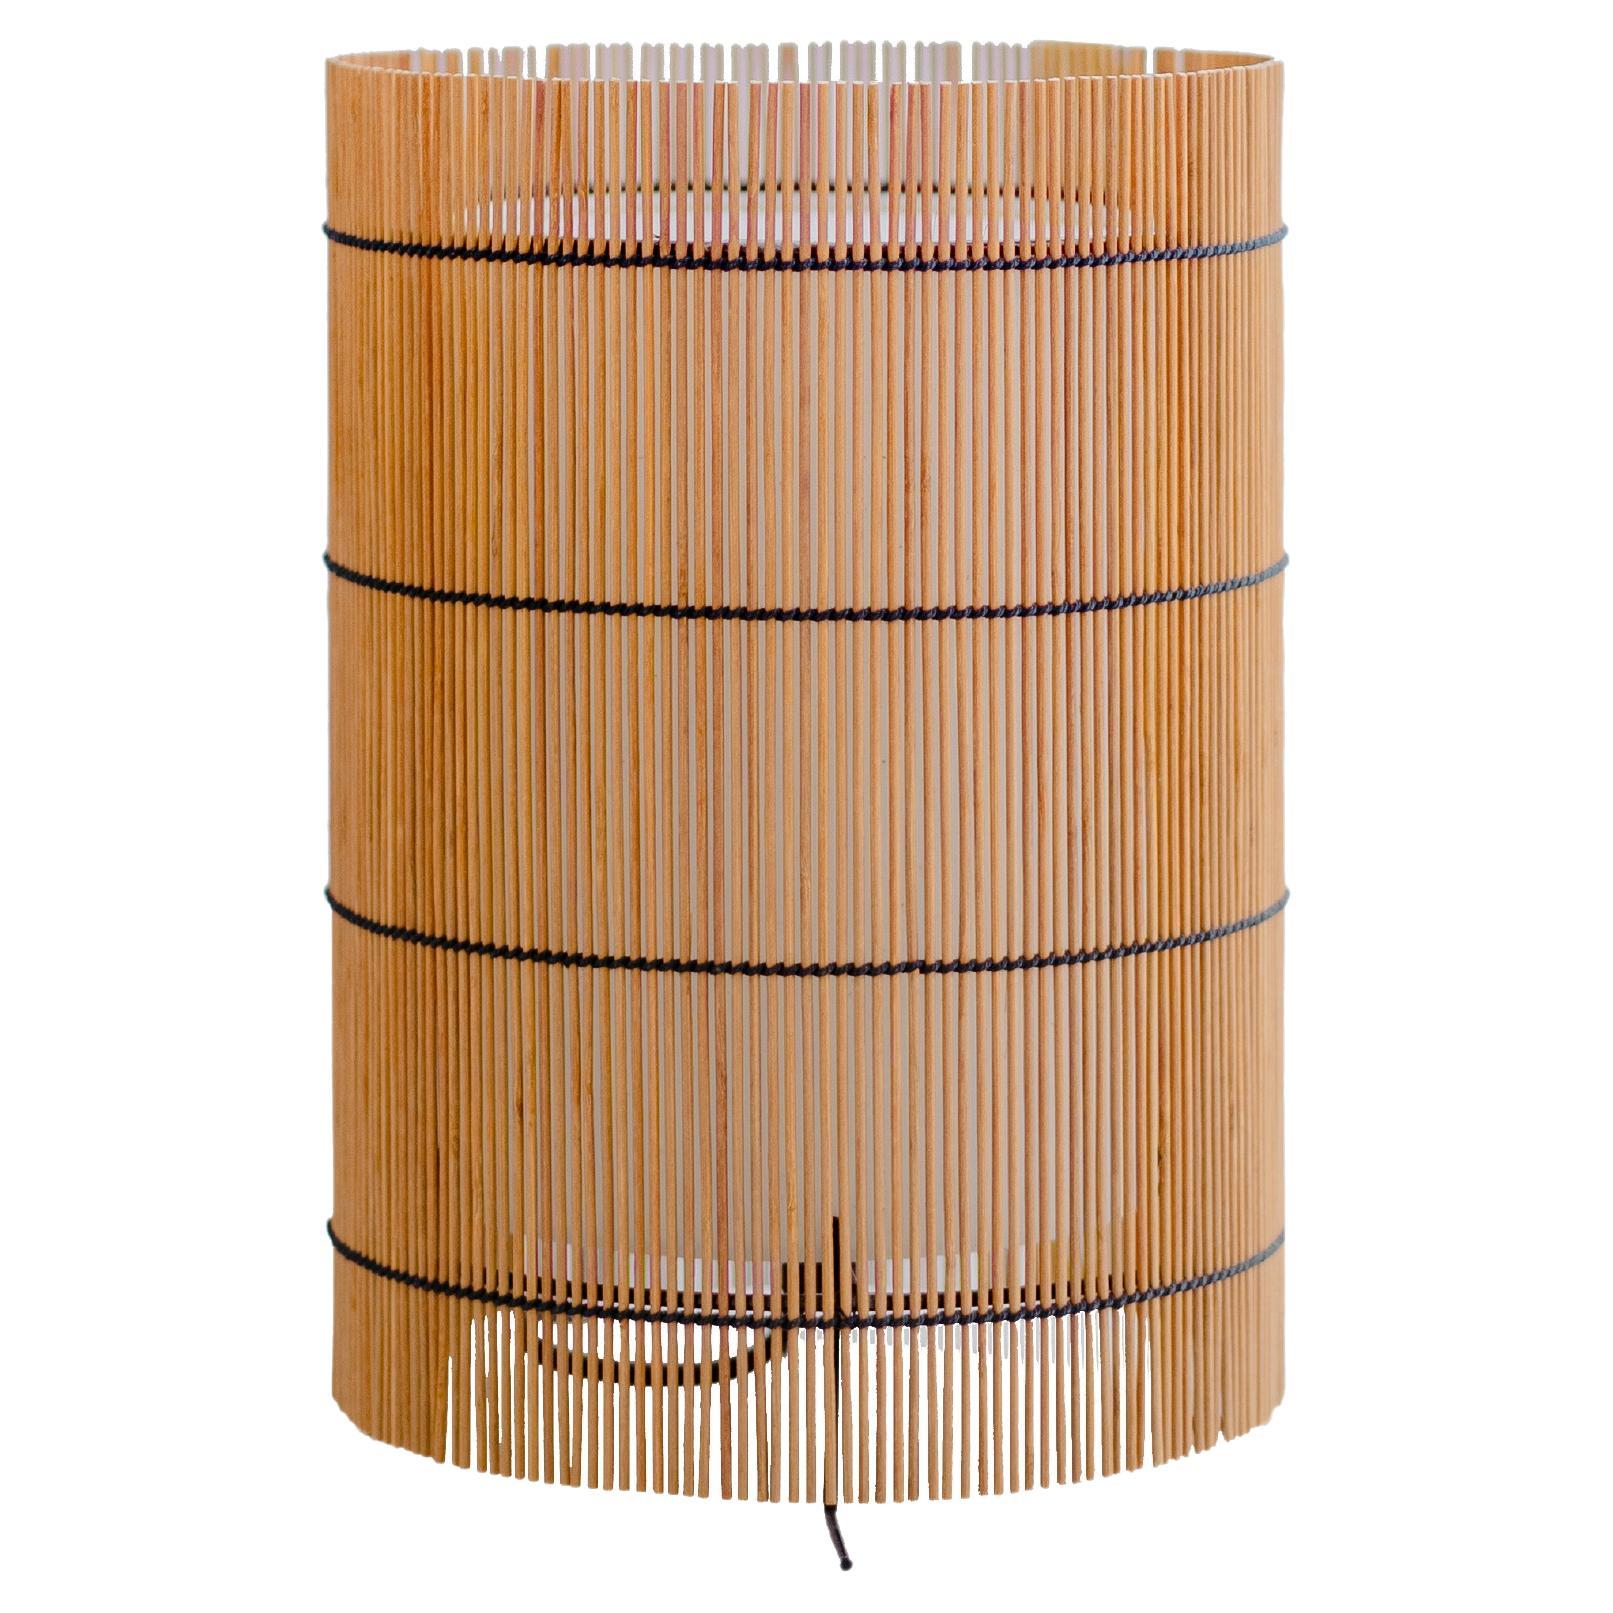 Contemporary, Handmade, Table Lamp M, Bamboo Cherry, by Mediterranean Objects